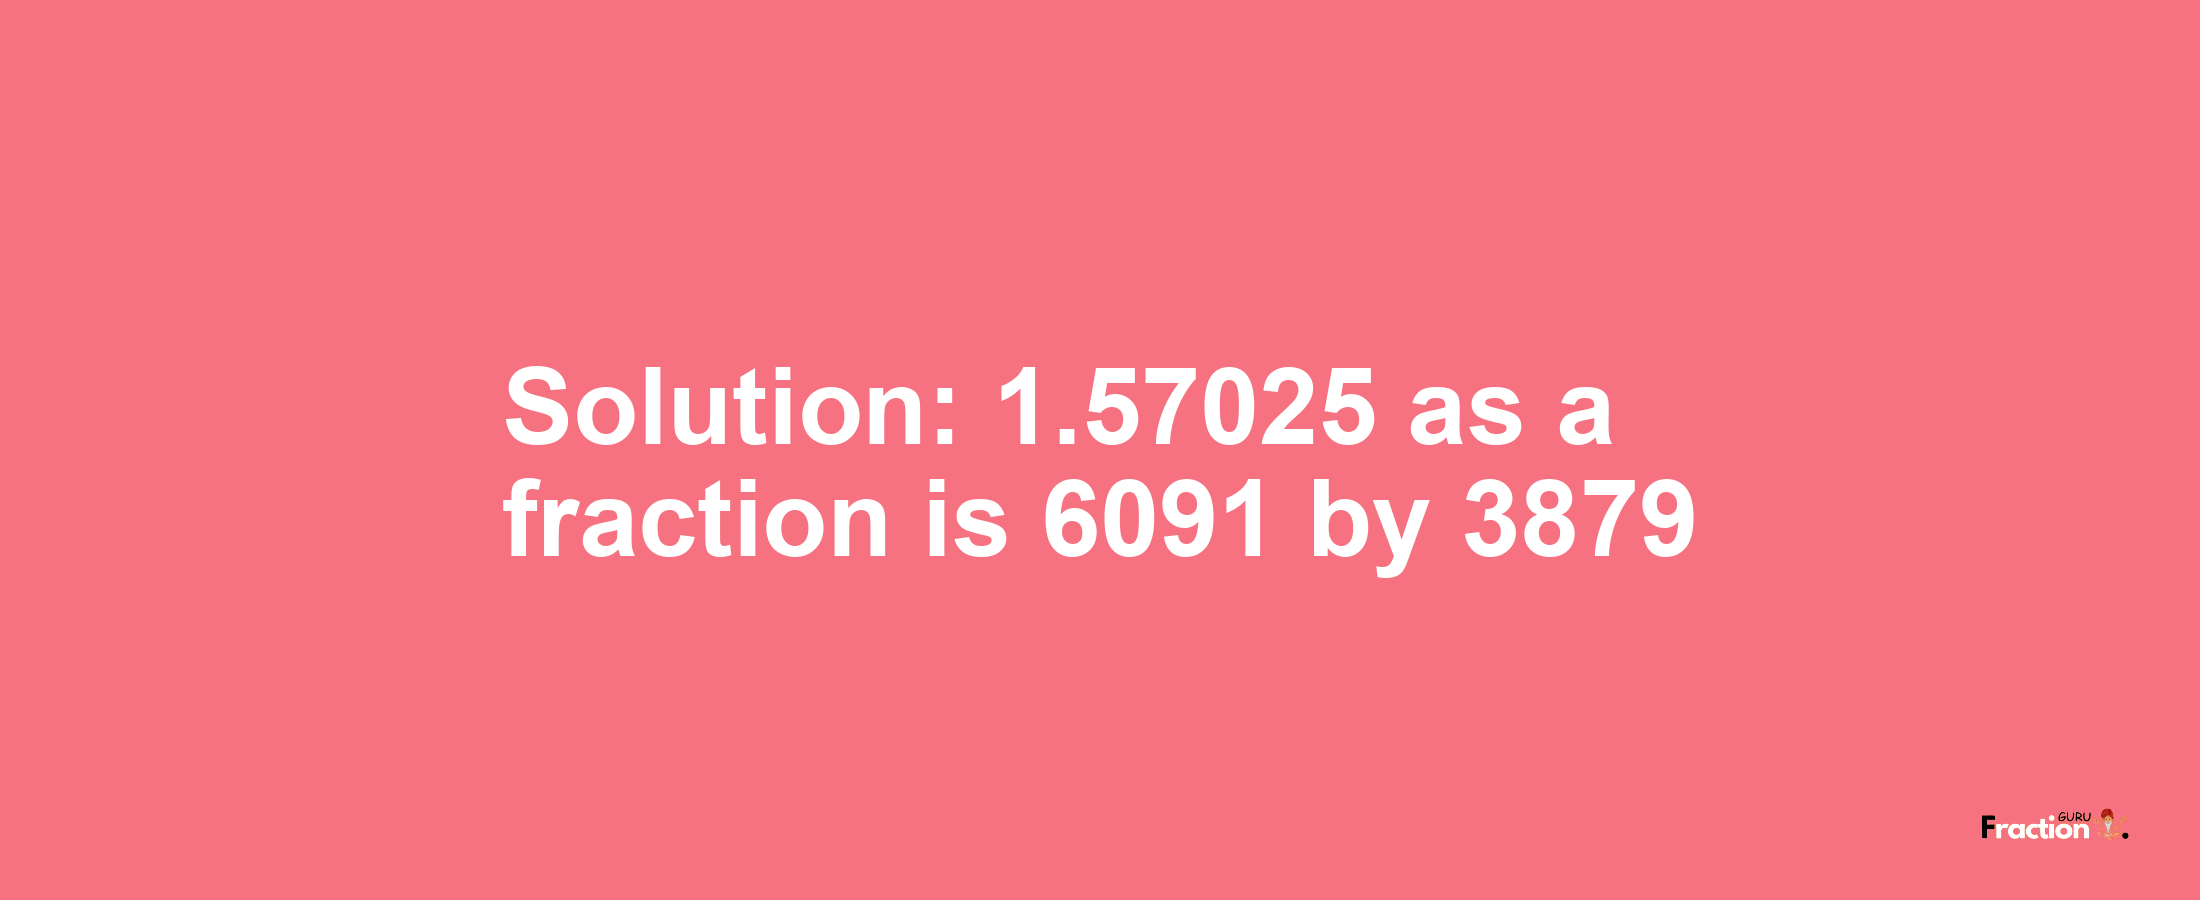 Solution:1.57025 as a fraction is 6091/3879